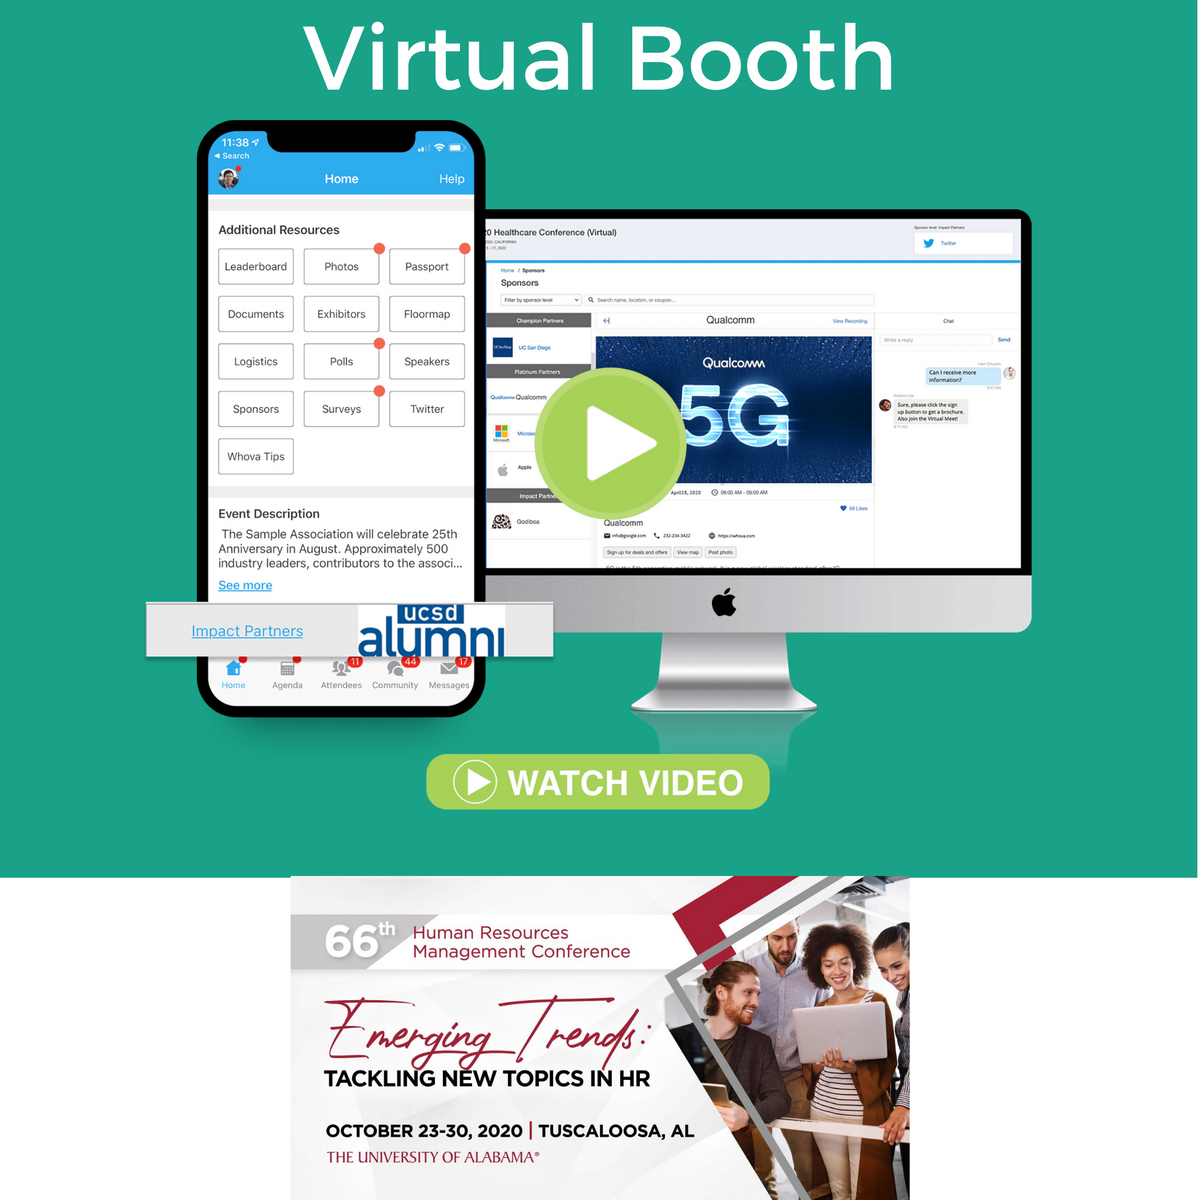 Virtual Booth in the Exhibitor Center